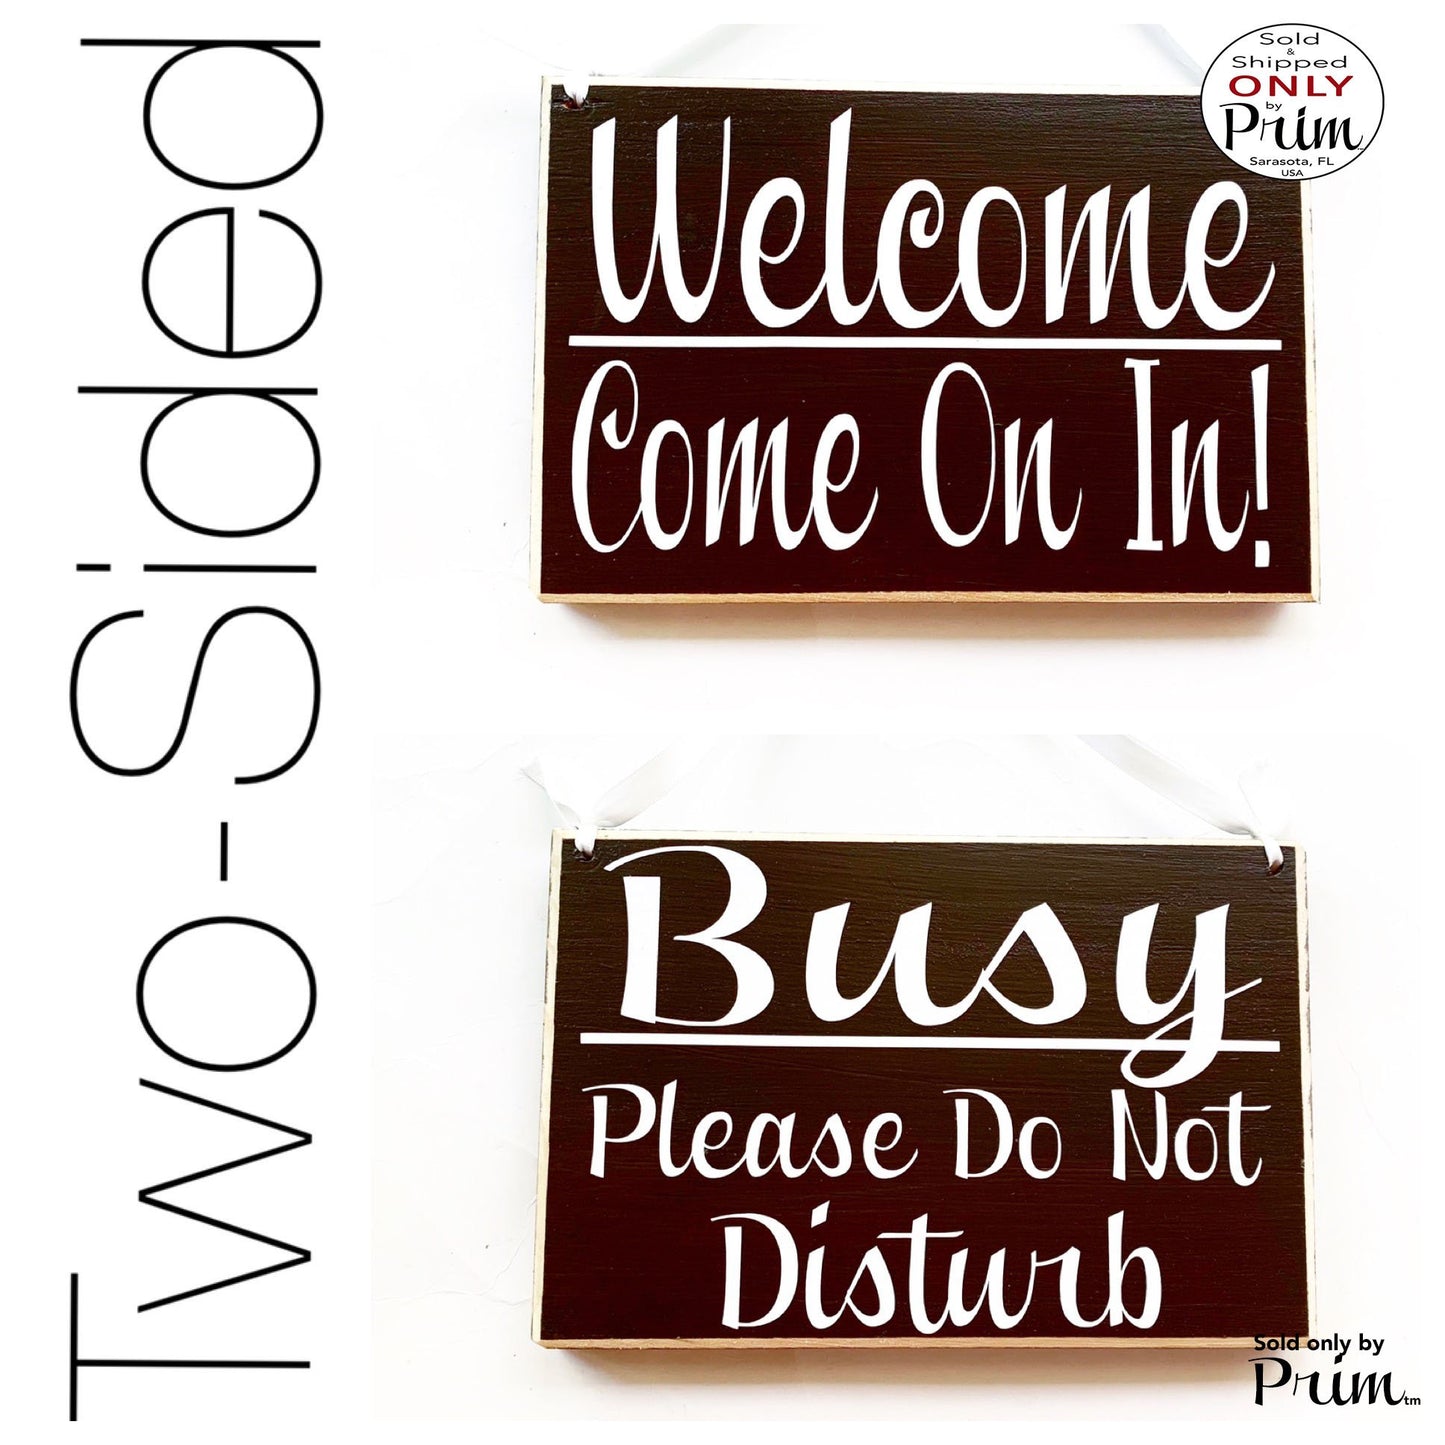 8x6 Two Sided Welcome Come On In Busy Please Do Not Disturb Custom Wood Sign Office Business Salon Spa Store In Session Door Plaque